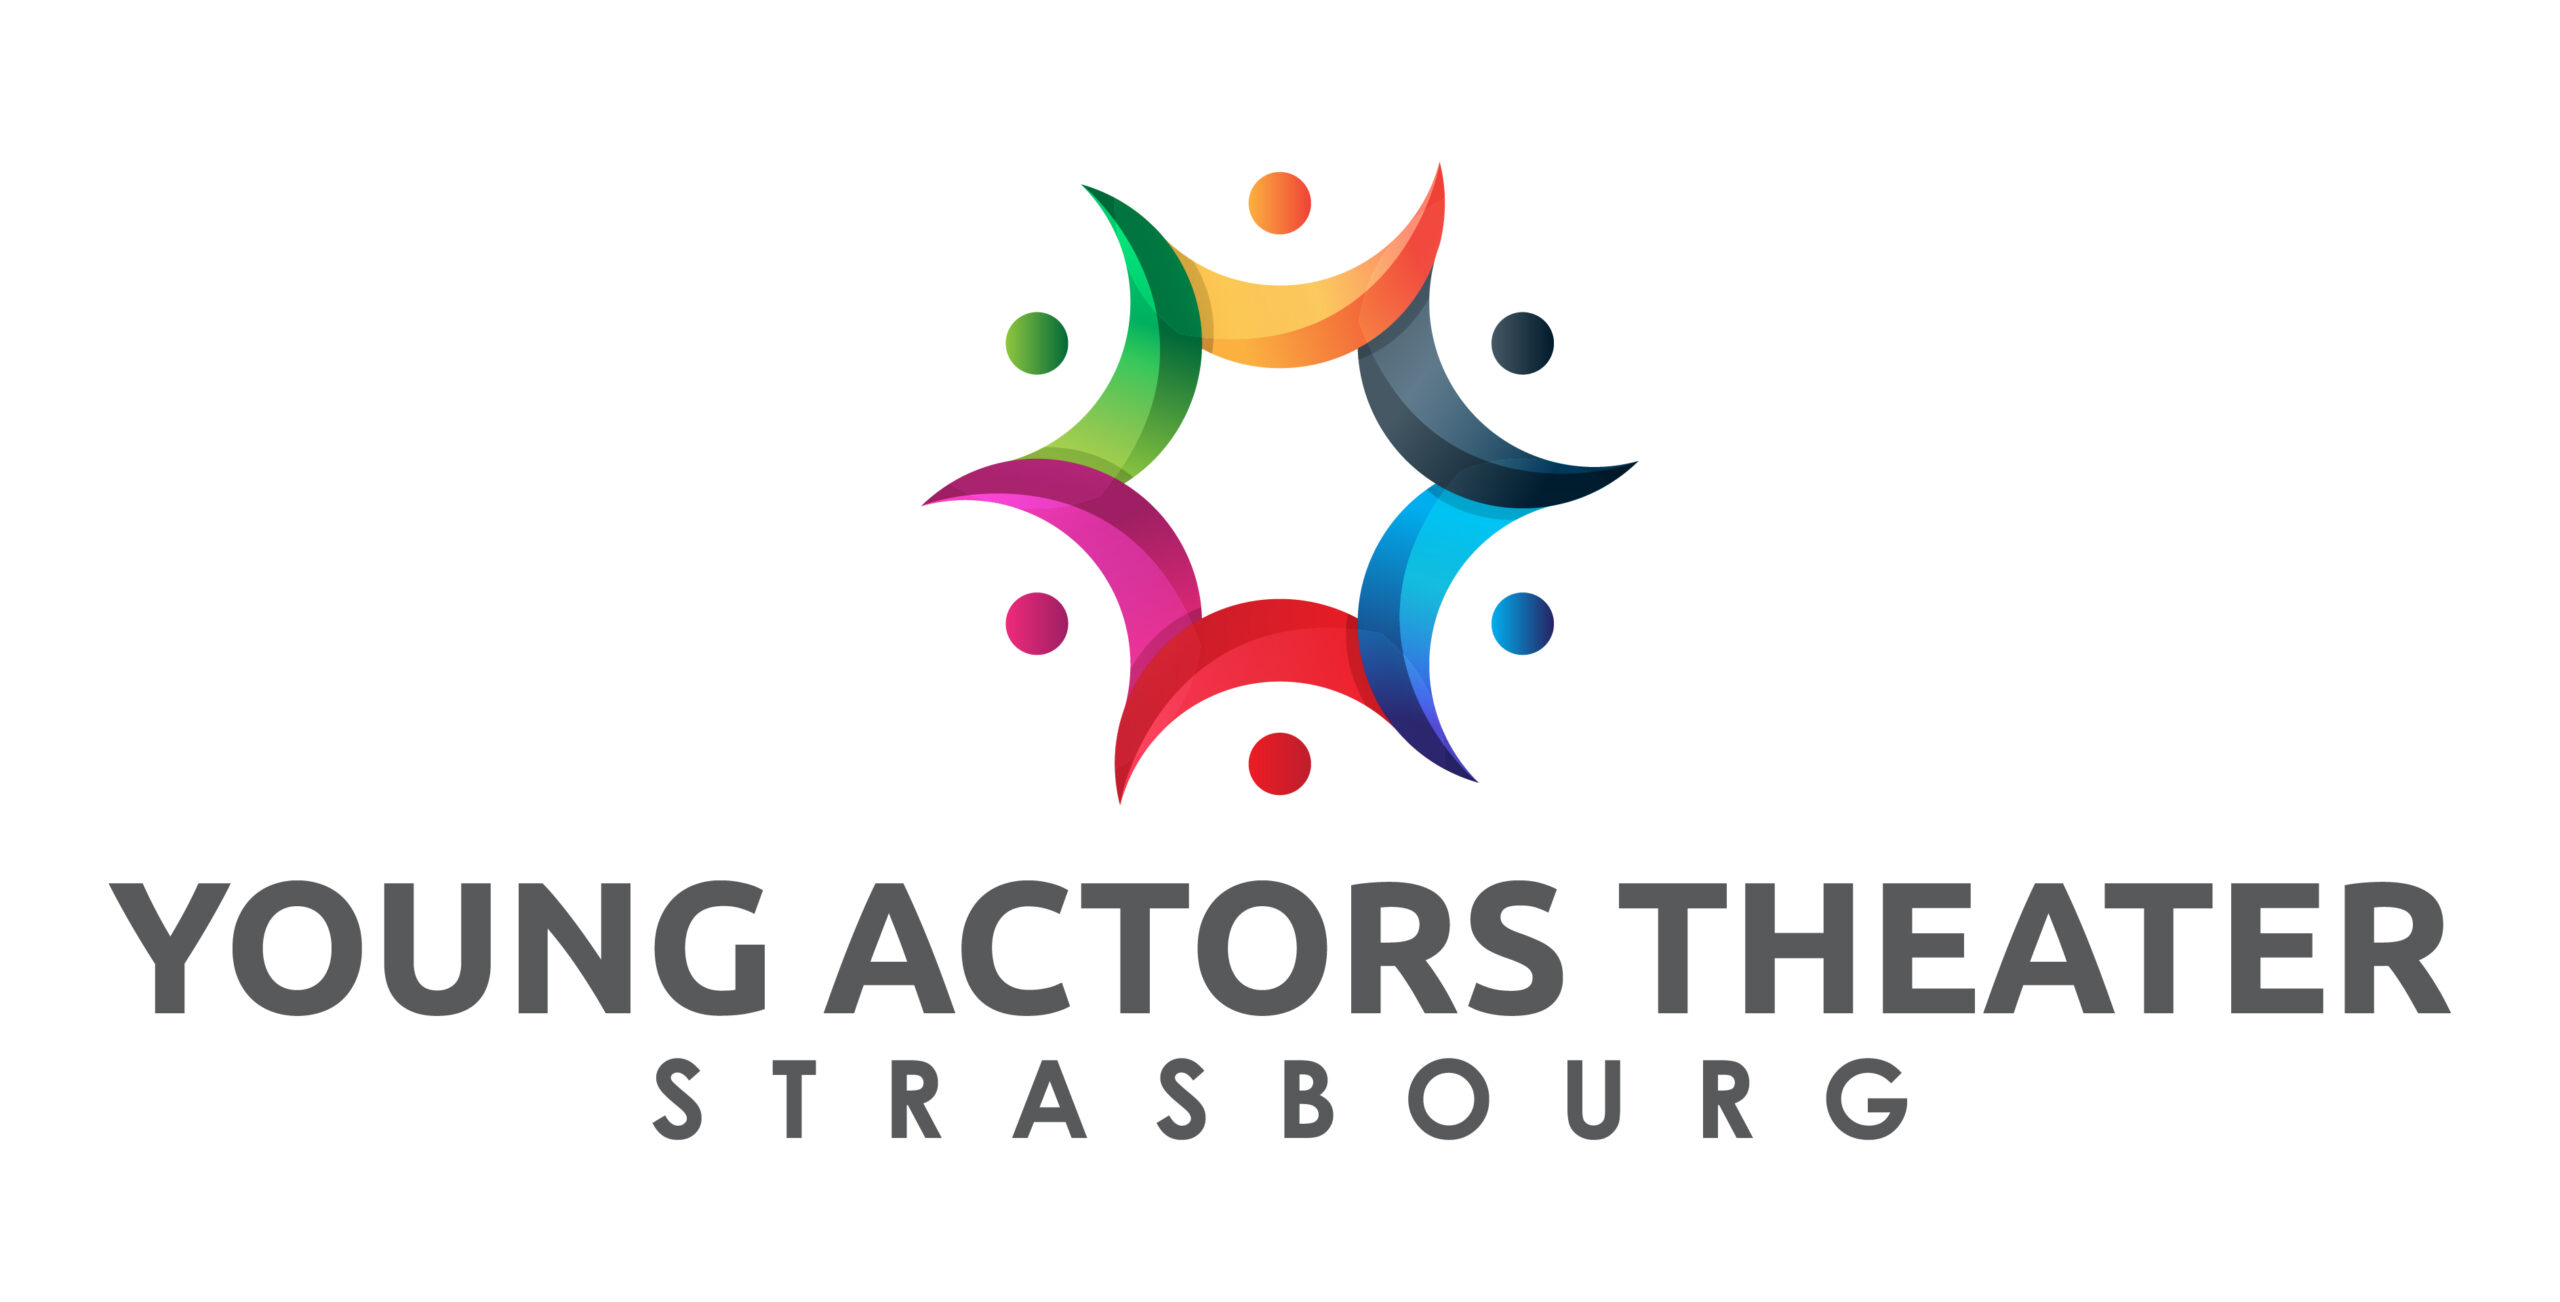 Young Actors Theater Strasbourg